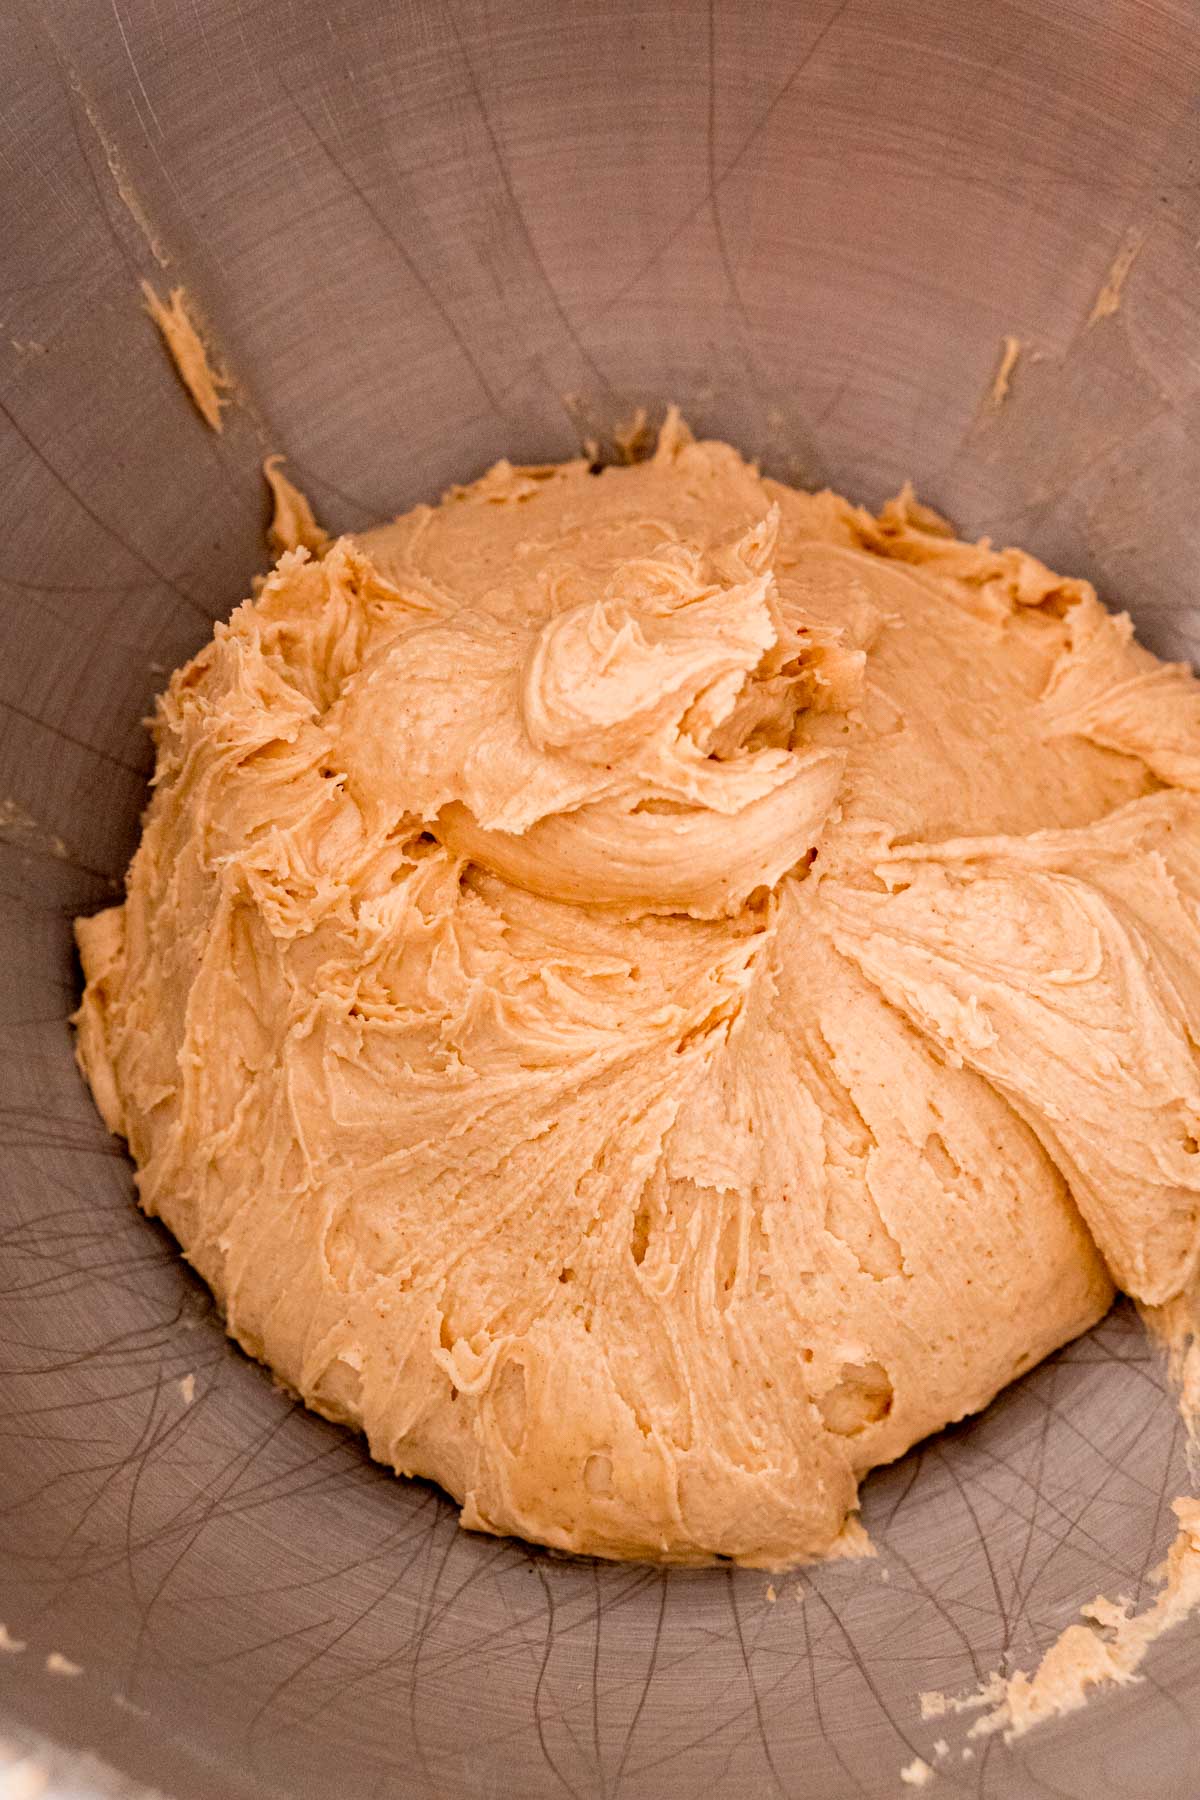 Peanut butter, butter, and powdered sugar mixed together in a metal mixing bowl.